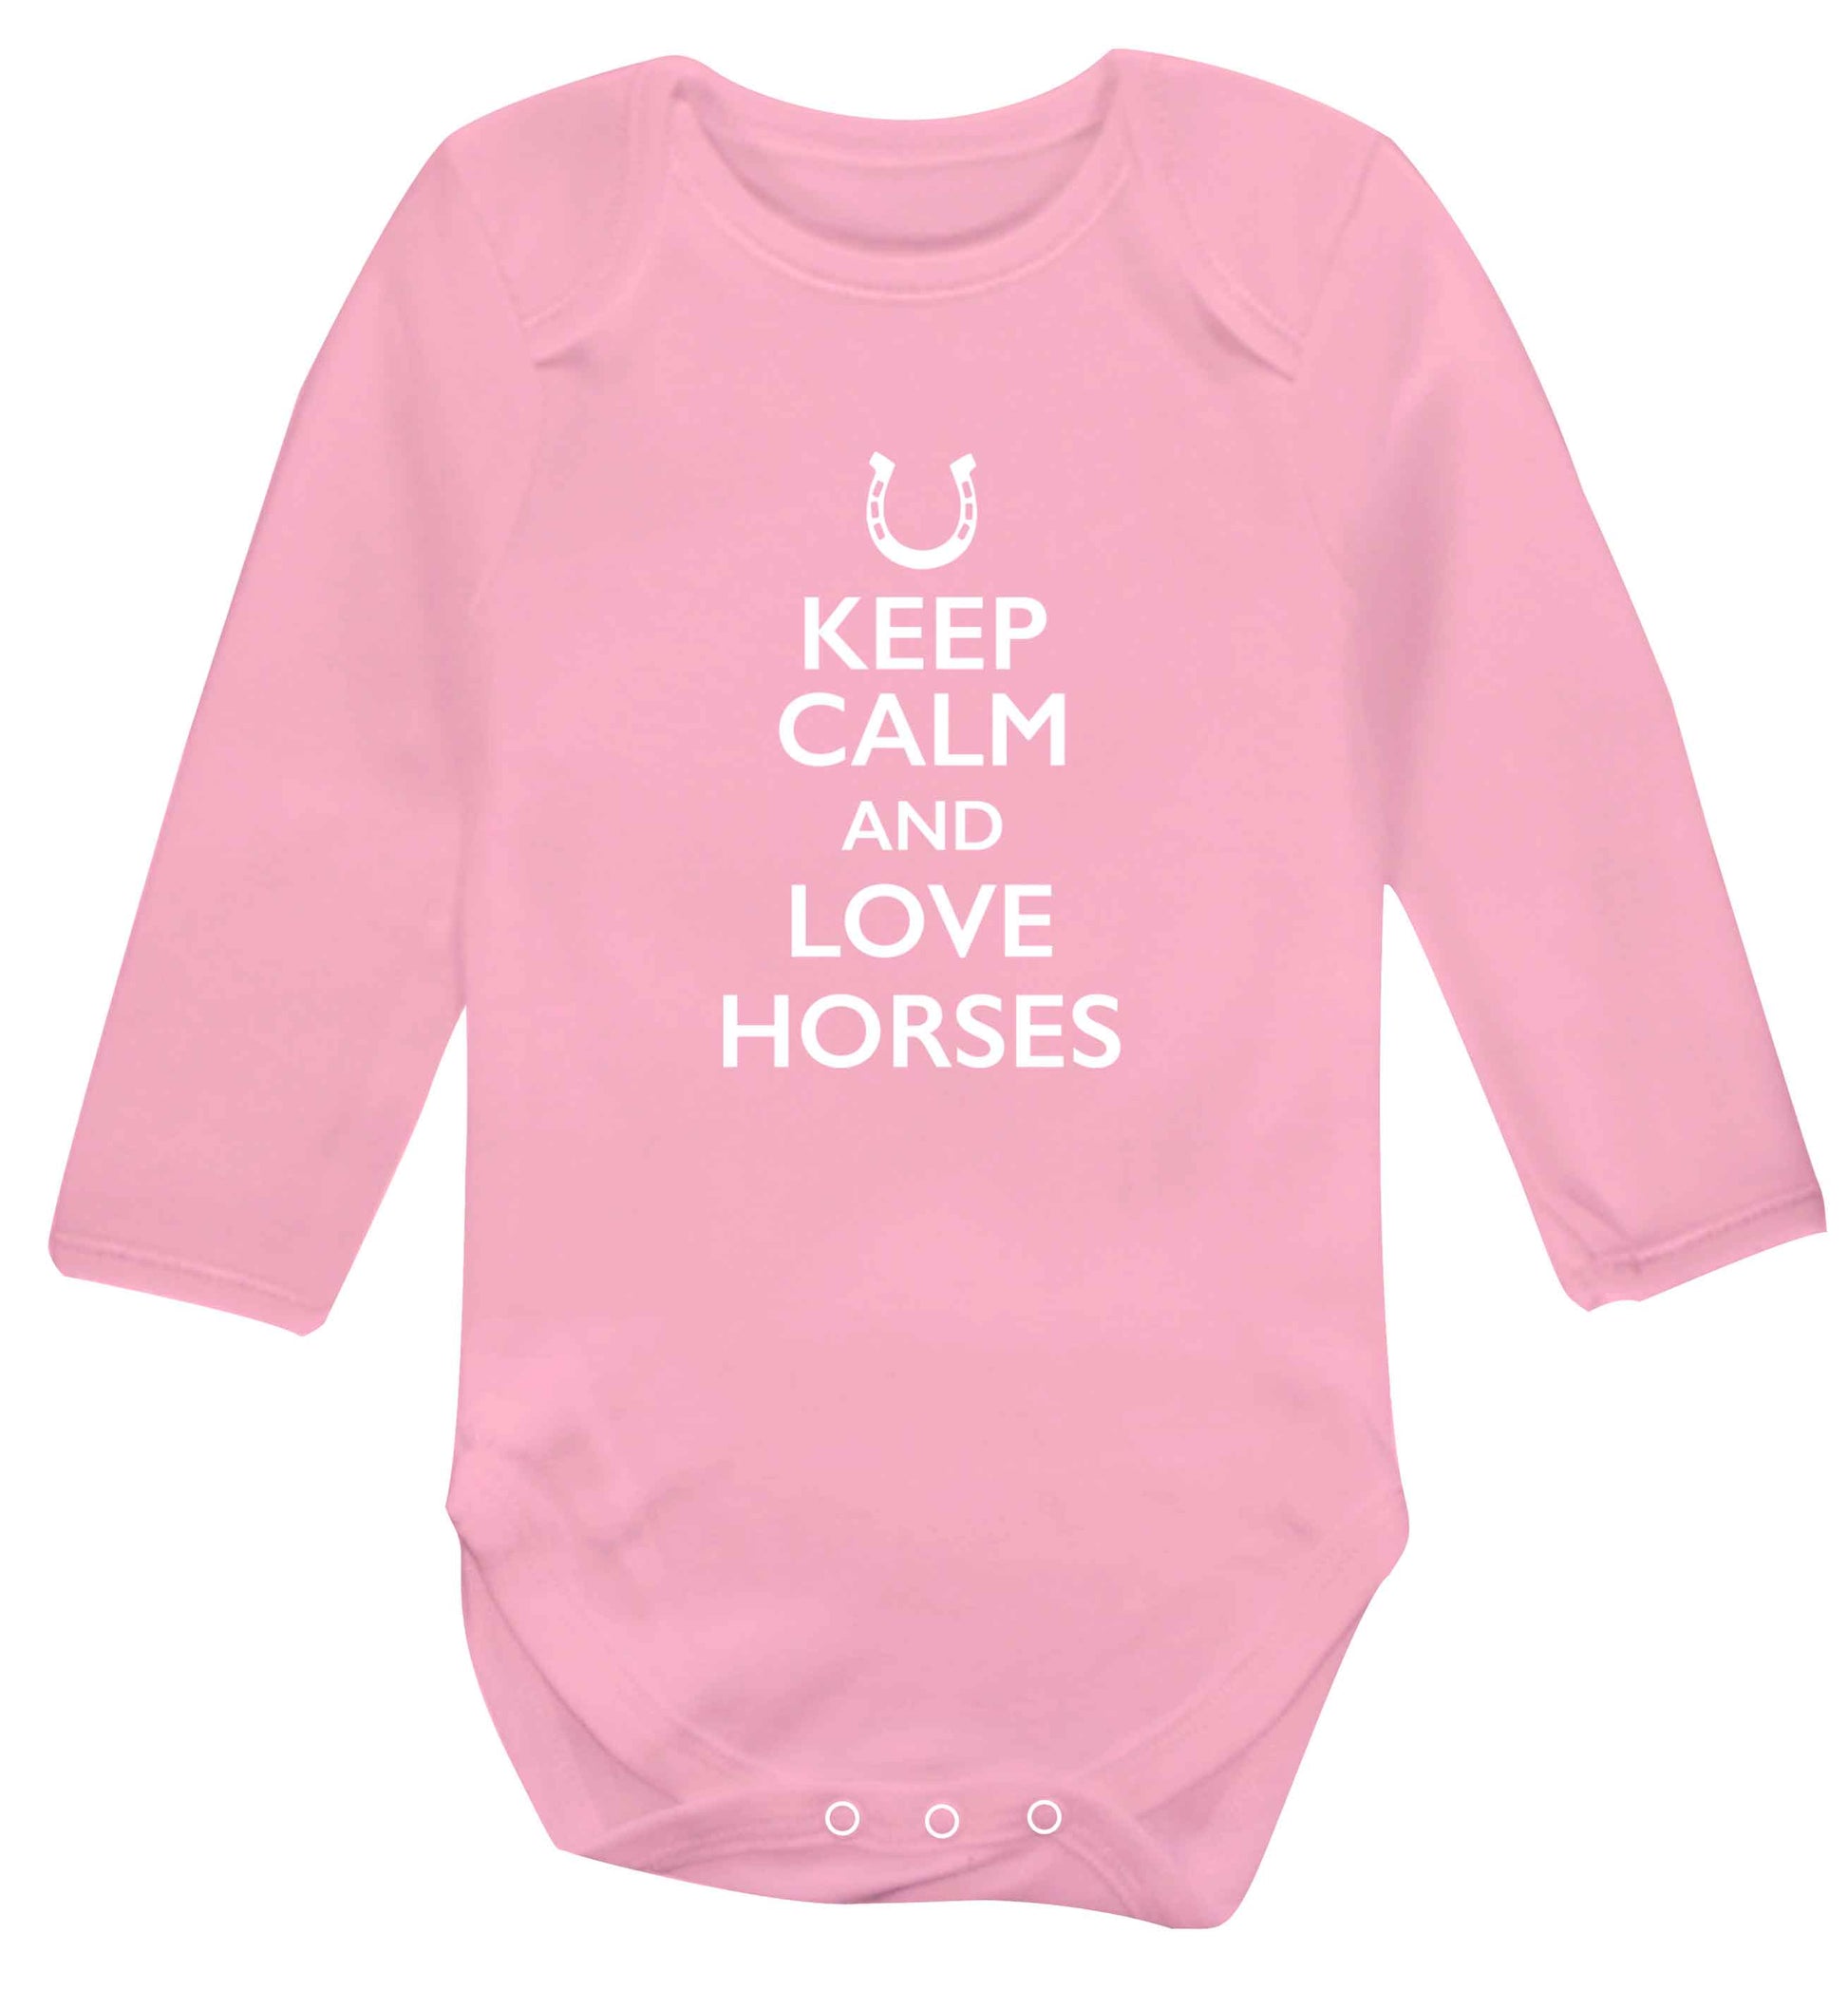 Keep calm and love horses baby vest long sleeved pale pink 6-12 months